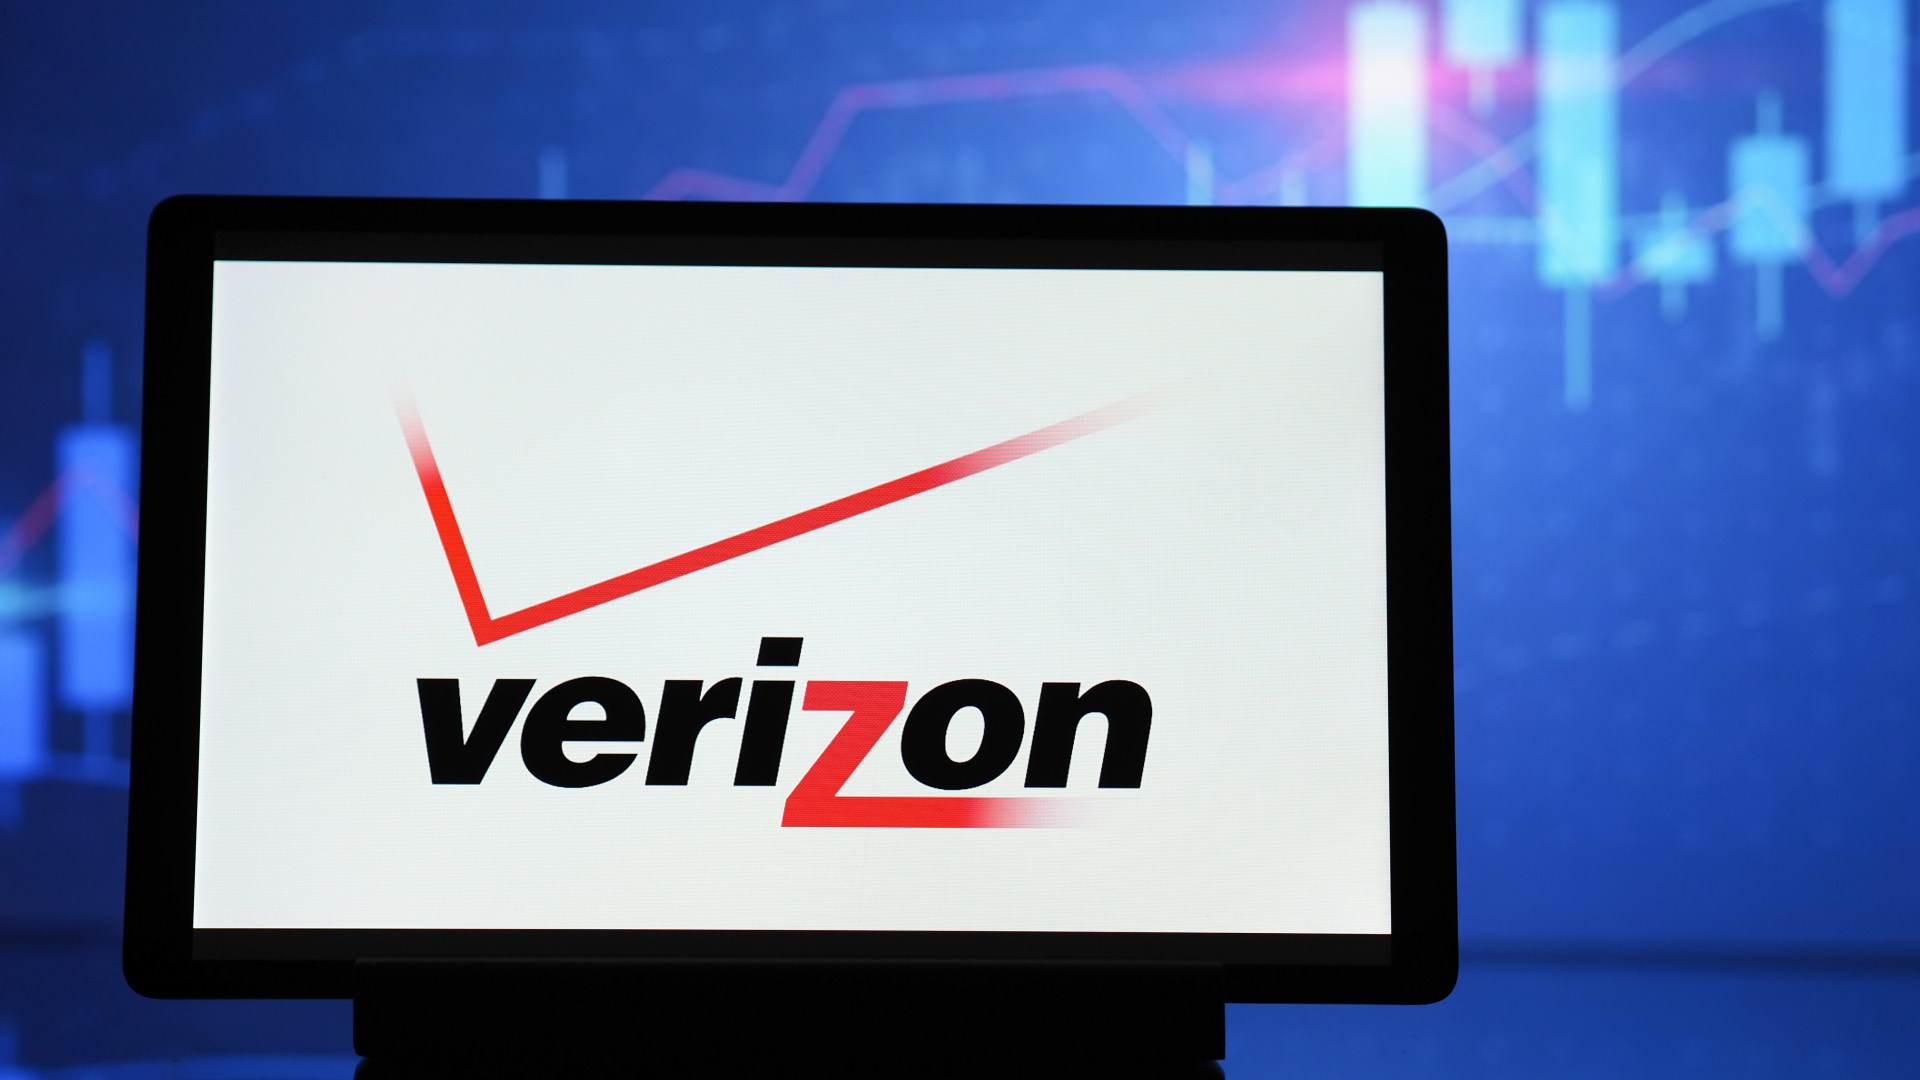 Verizon Outage Frustrates Customers: Mobile Phones Use Impacted by Widespread Carrier Issues